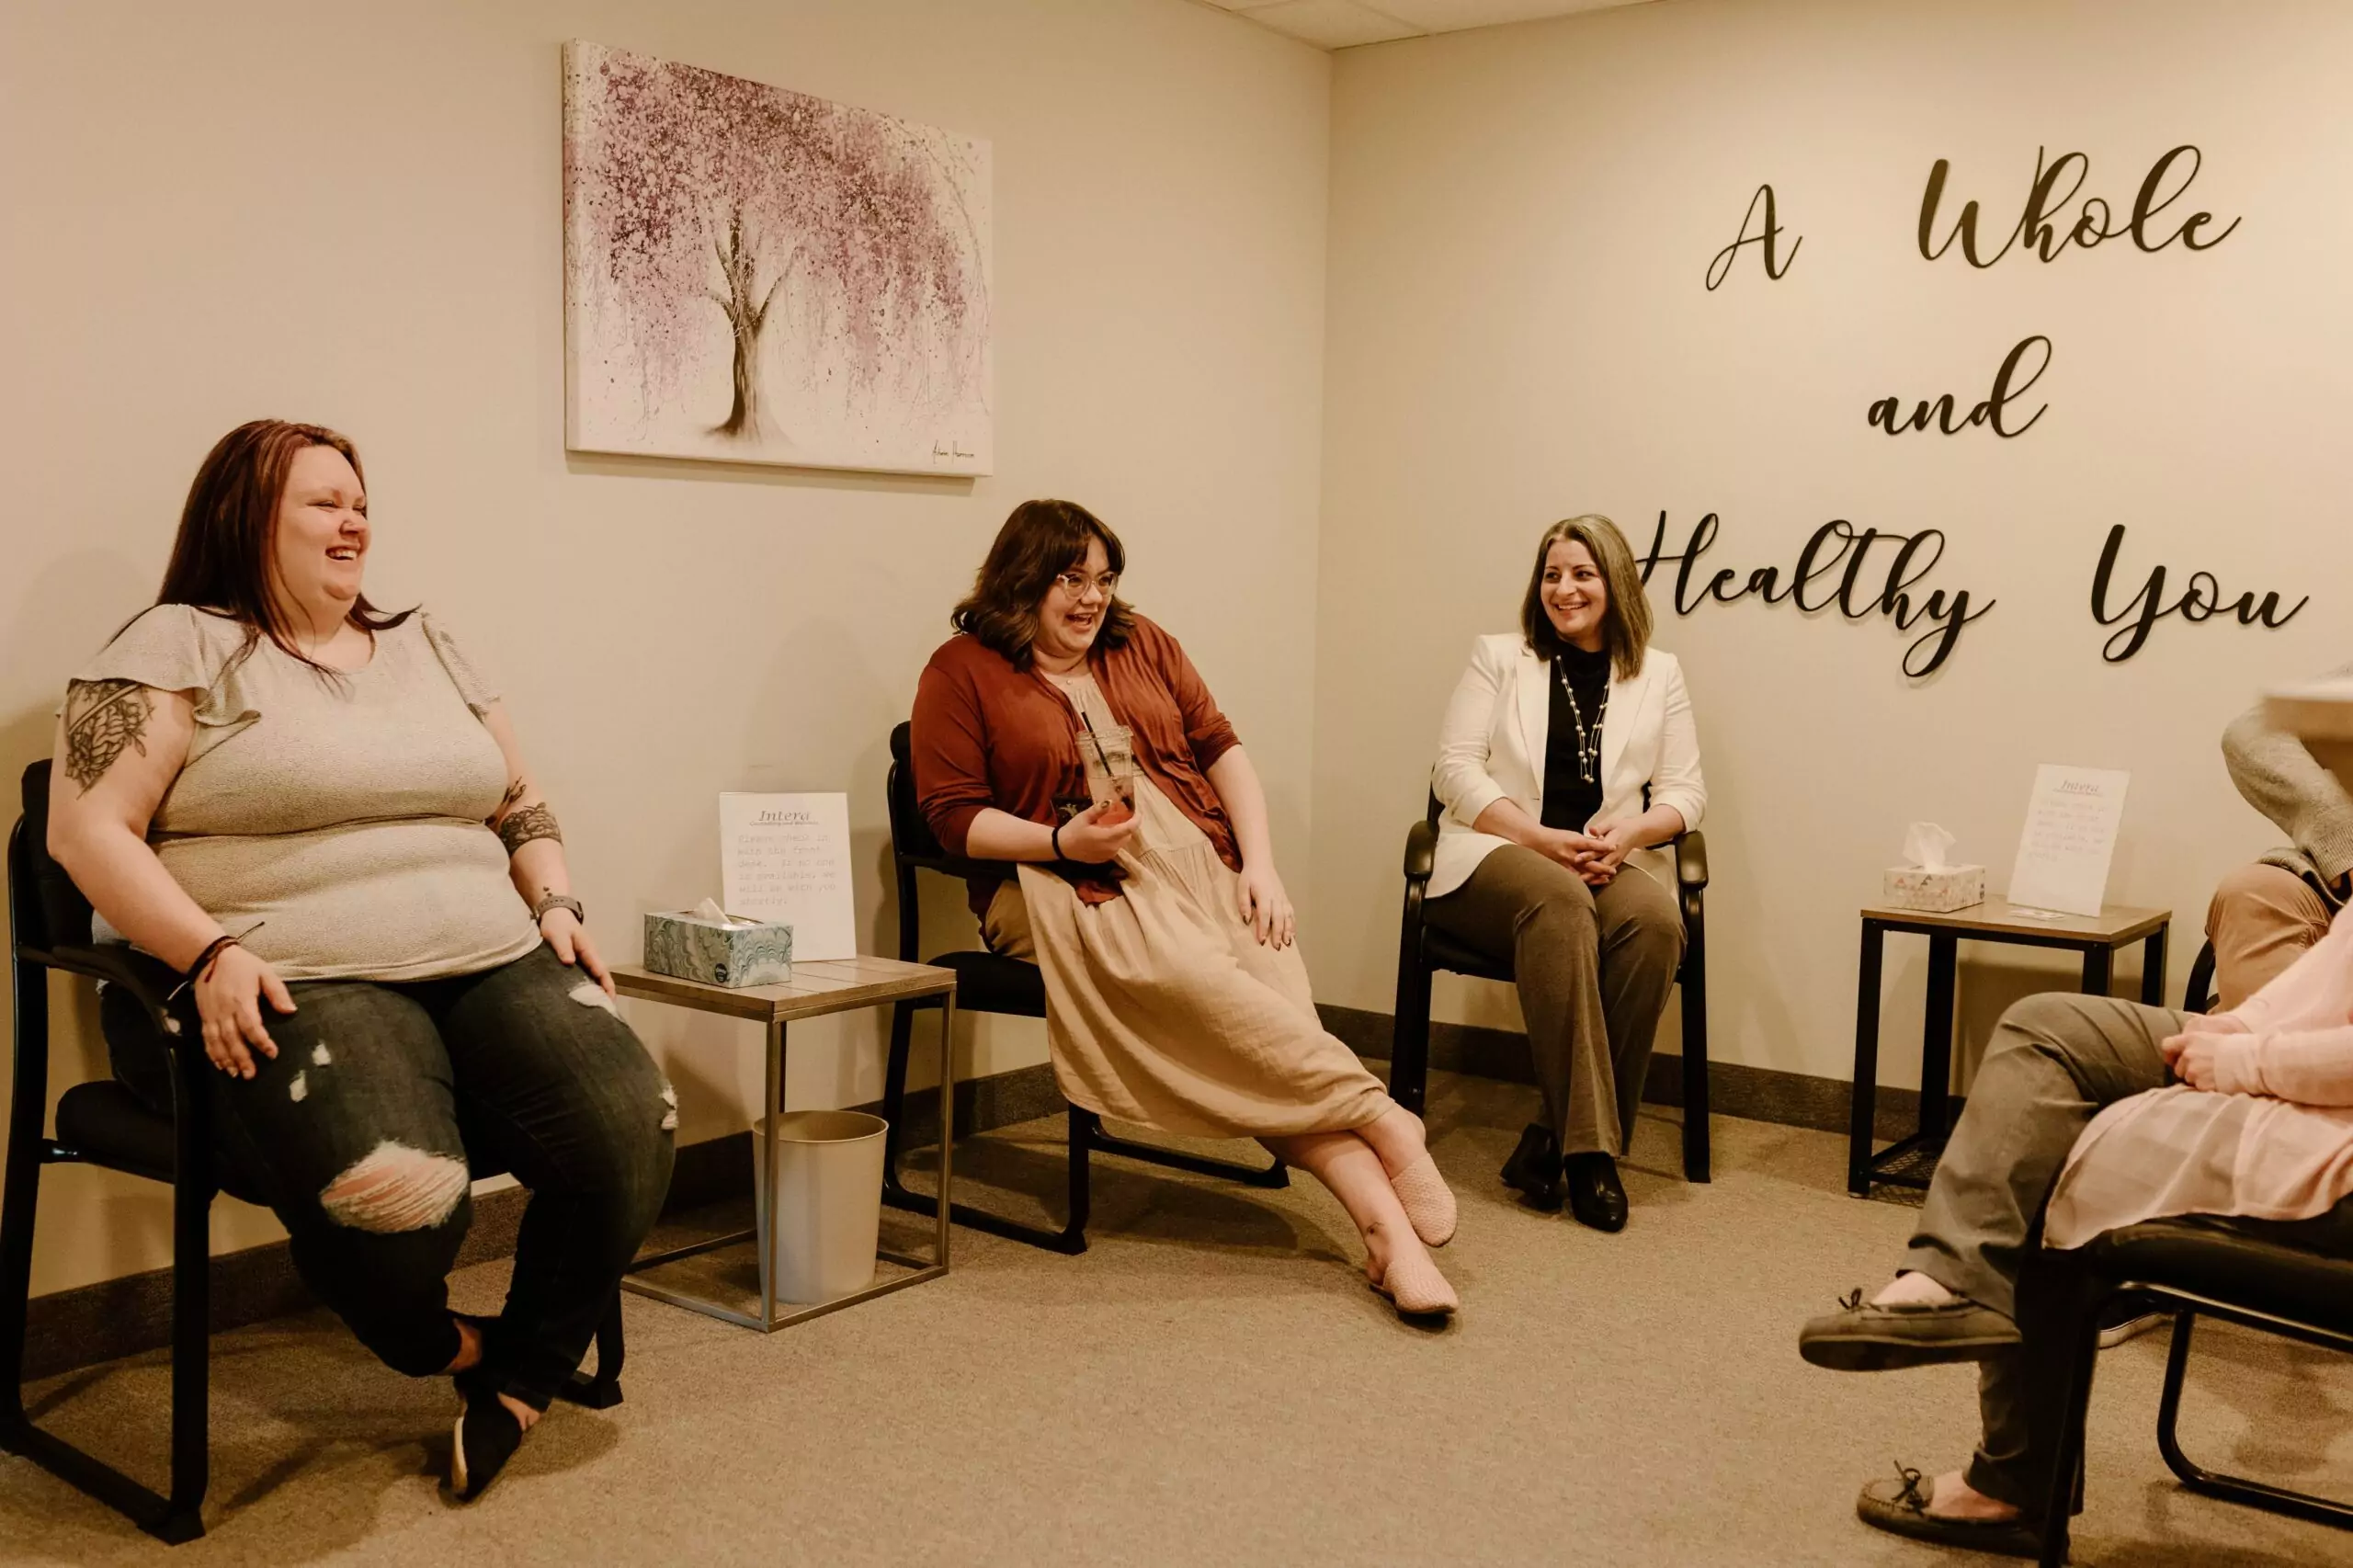 The staff of Intera sitting in the waiting room. From left to right: Taylour, Amanda, Mary.